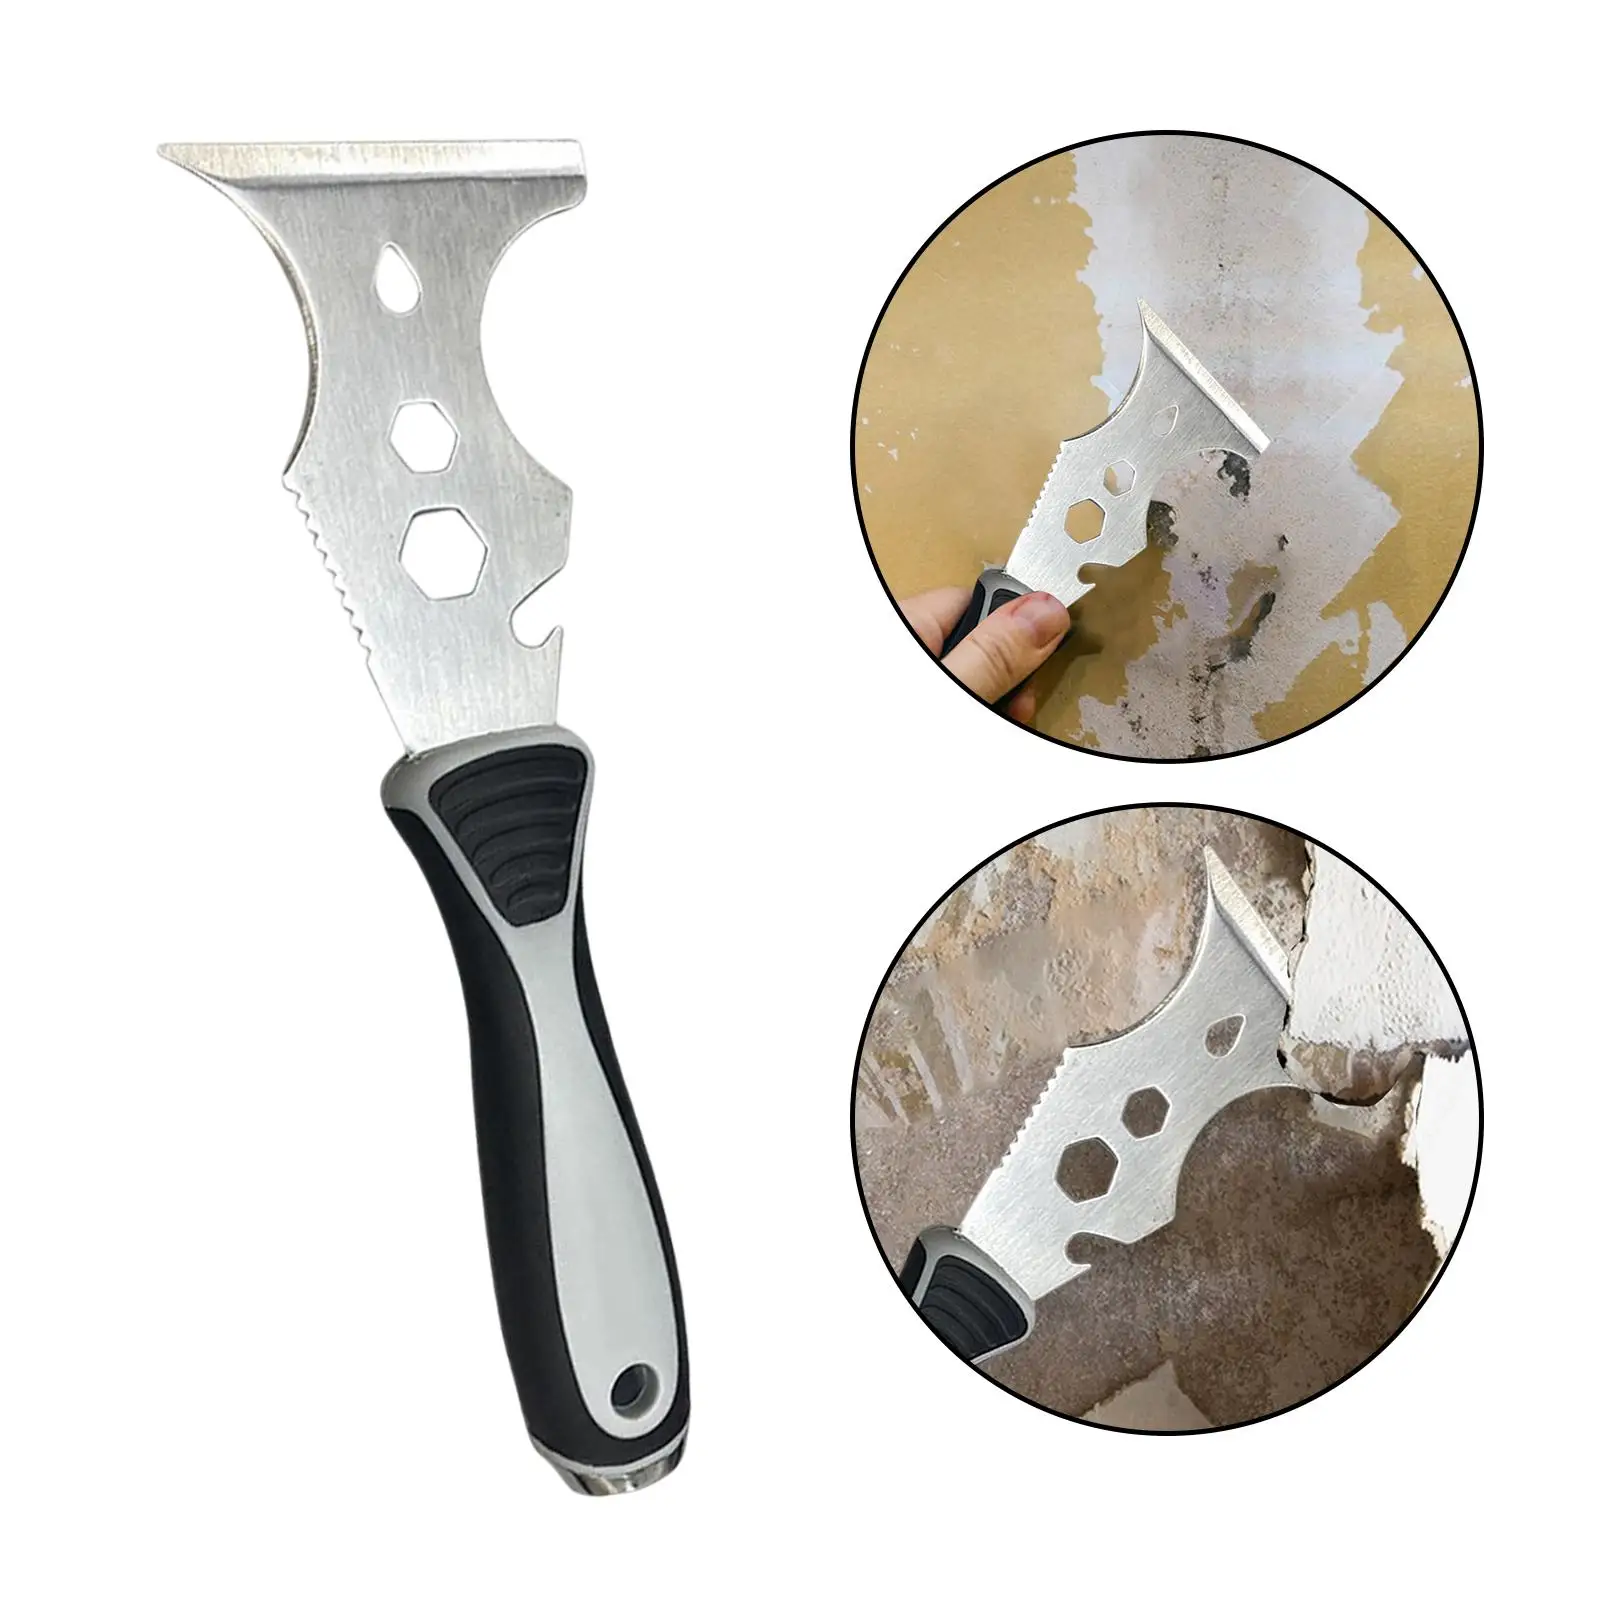 Multi Use Paint Scraper Removal Tool Paint Remover Painting Tools Professional Putty Knife for Home Decoration Repair